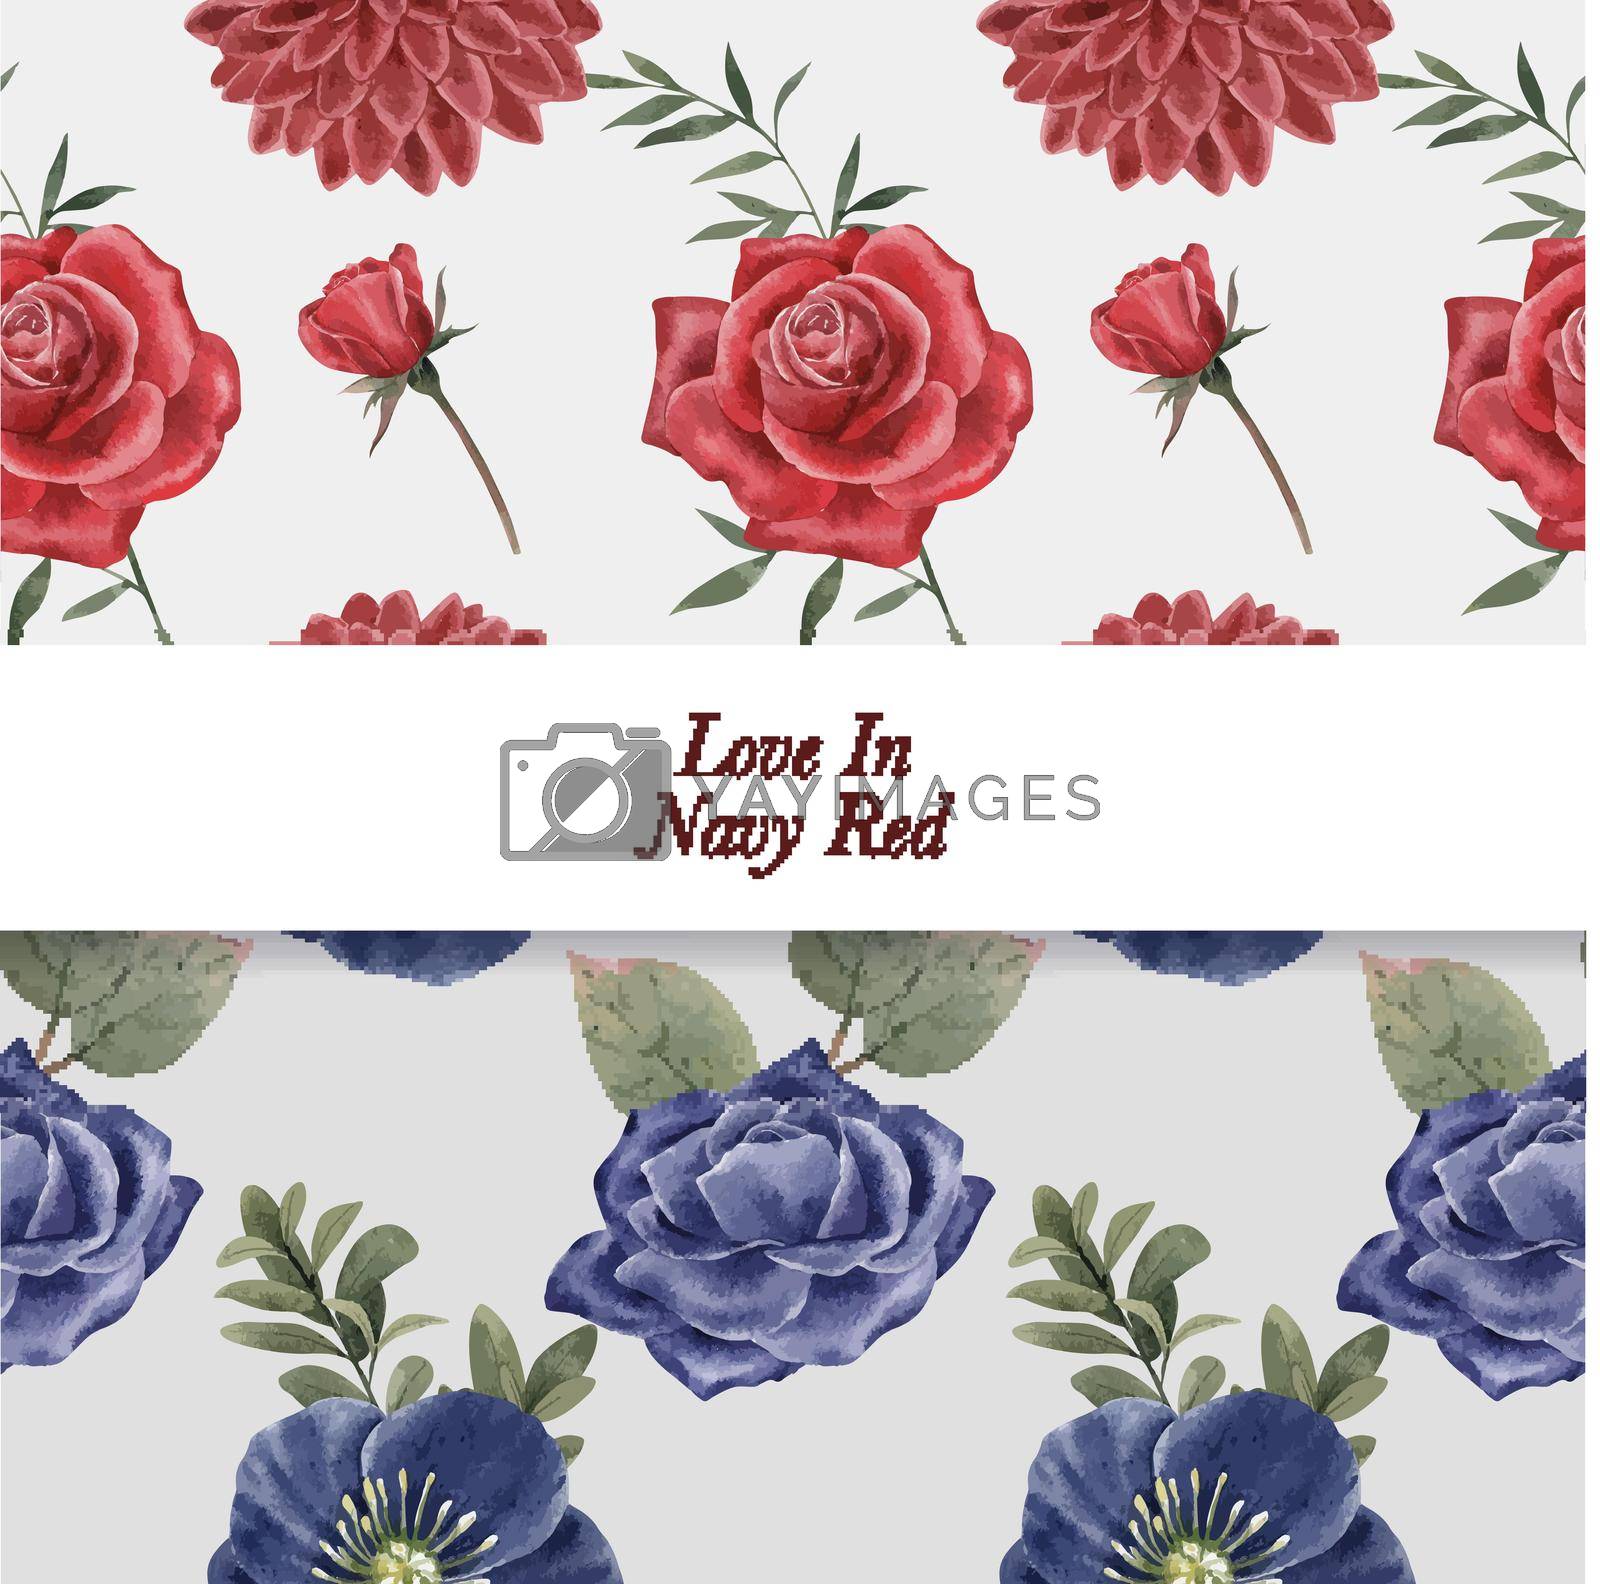 Royalty free image of pattern seamless with red navy wedding concept,watercolor style by Photographeeasia